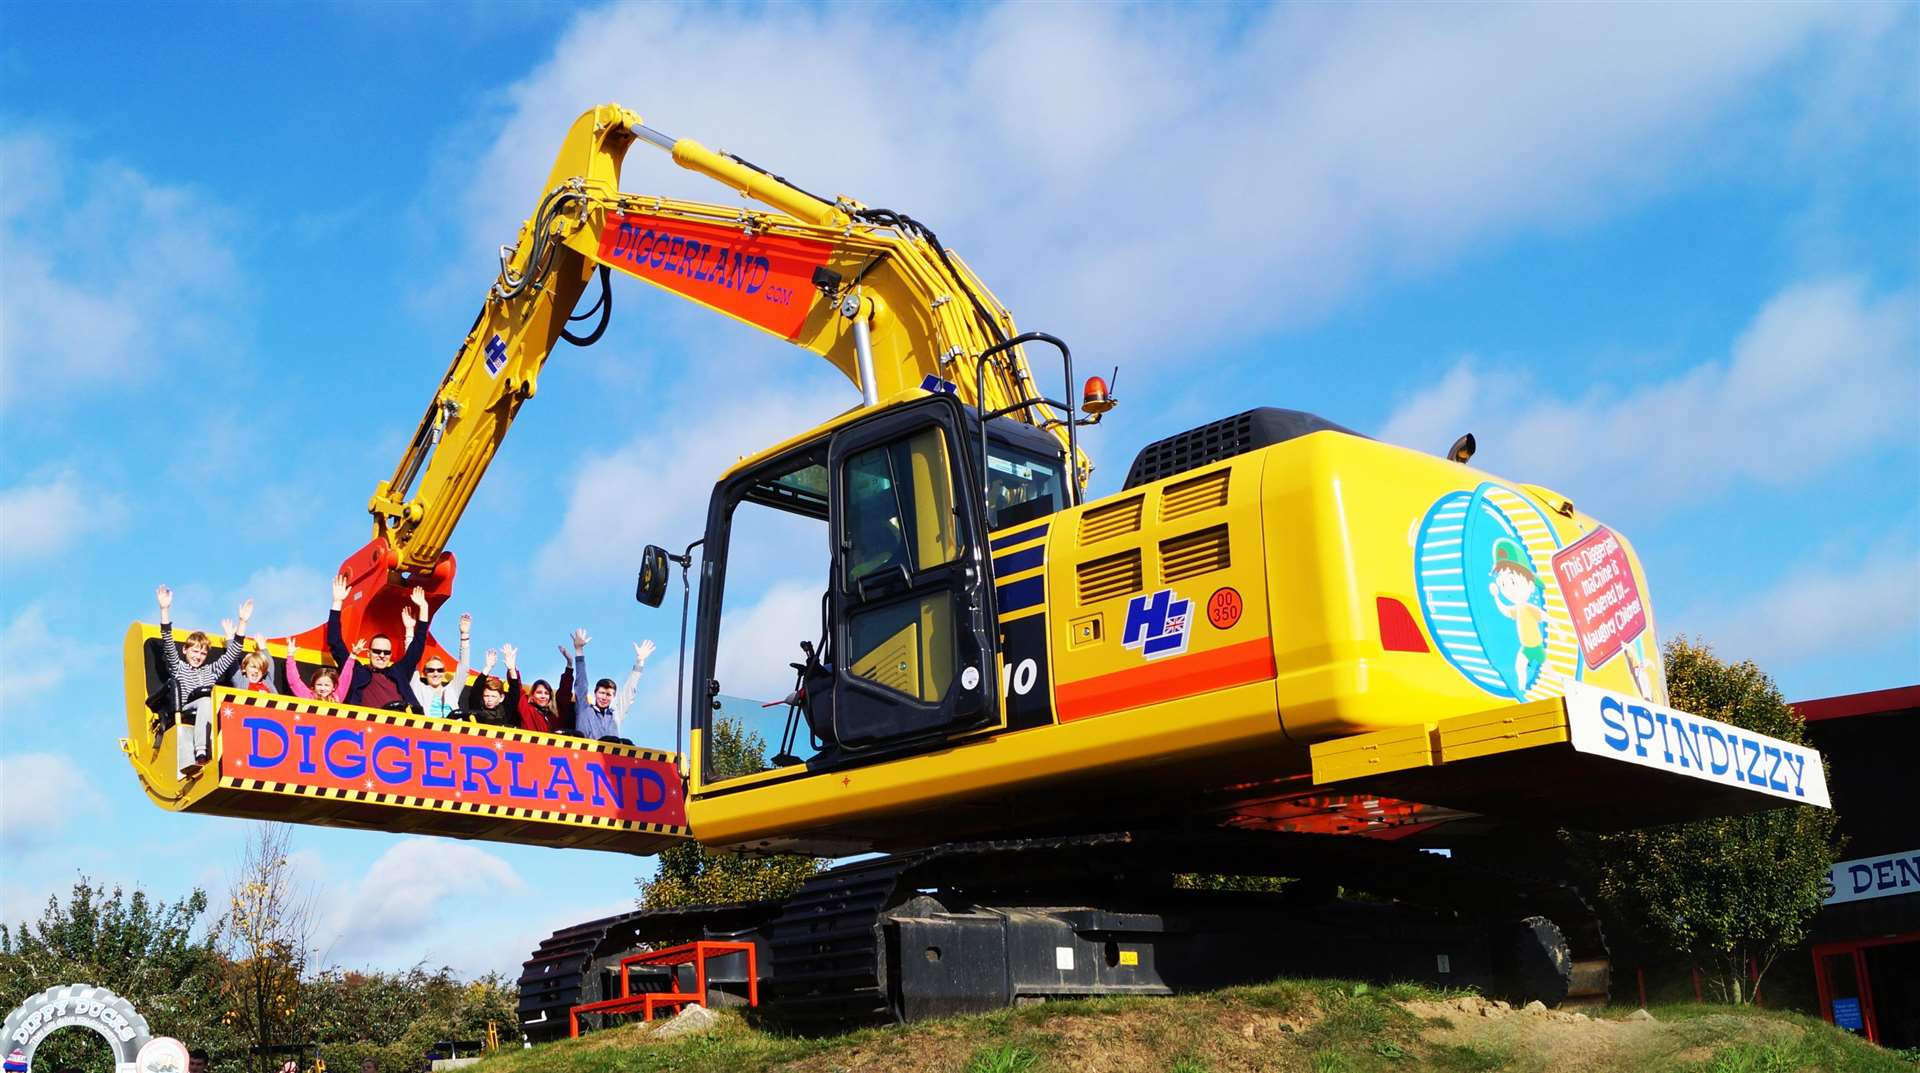 Diggerland has a Christmas treat up for grabs